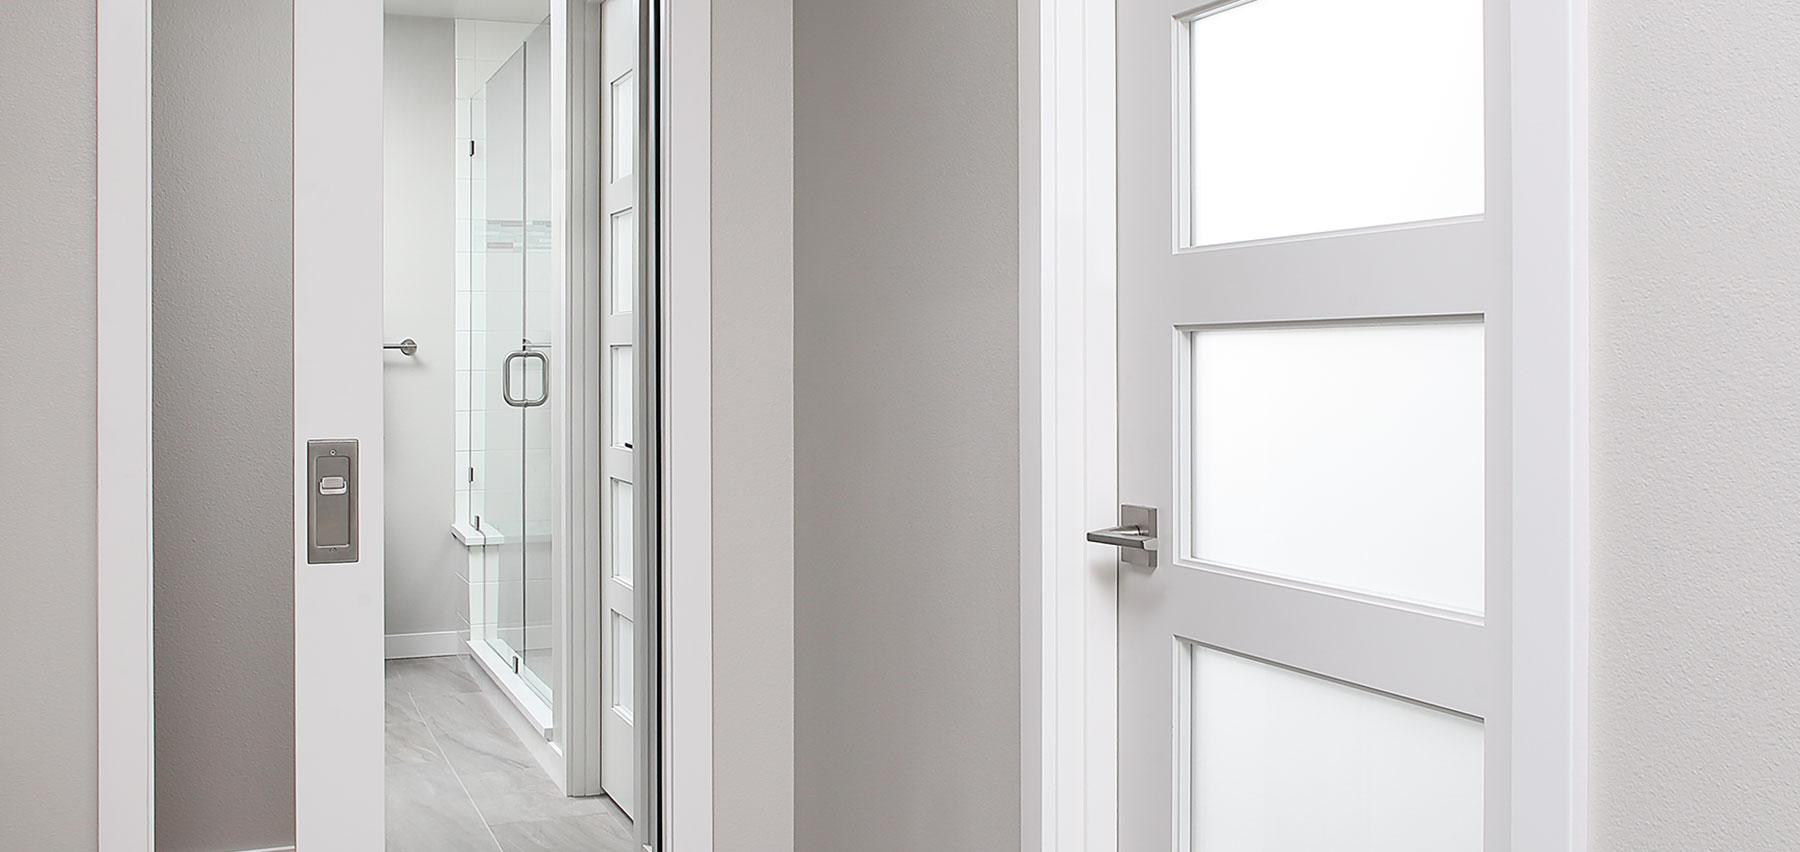 TM9000 pocket door with inset mirror and TS5000 with white lami glass